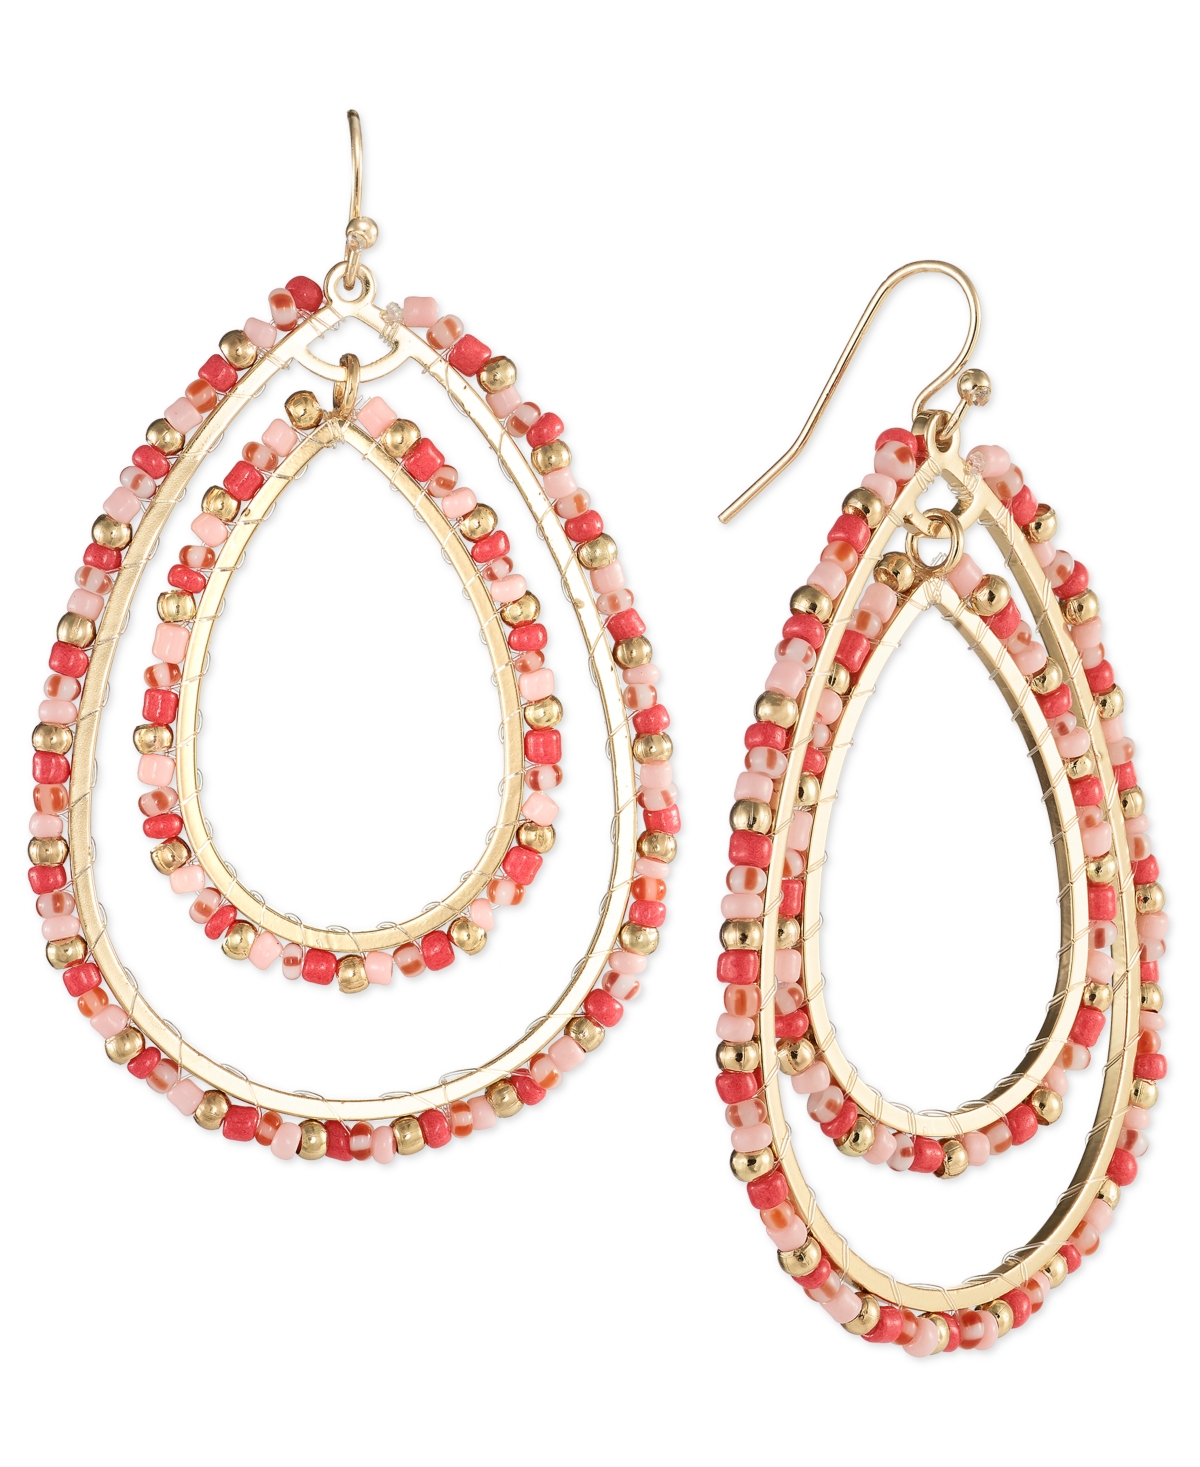 Mixed-Metal Crystal Double Oval Earrings, Created for Macy's - Coral